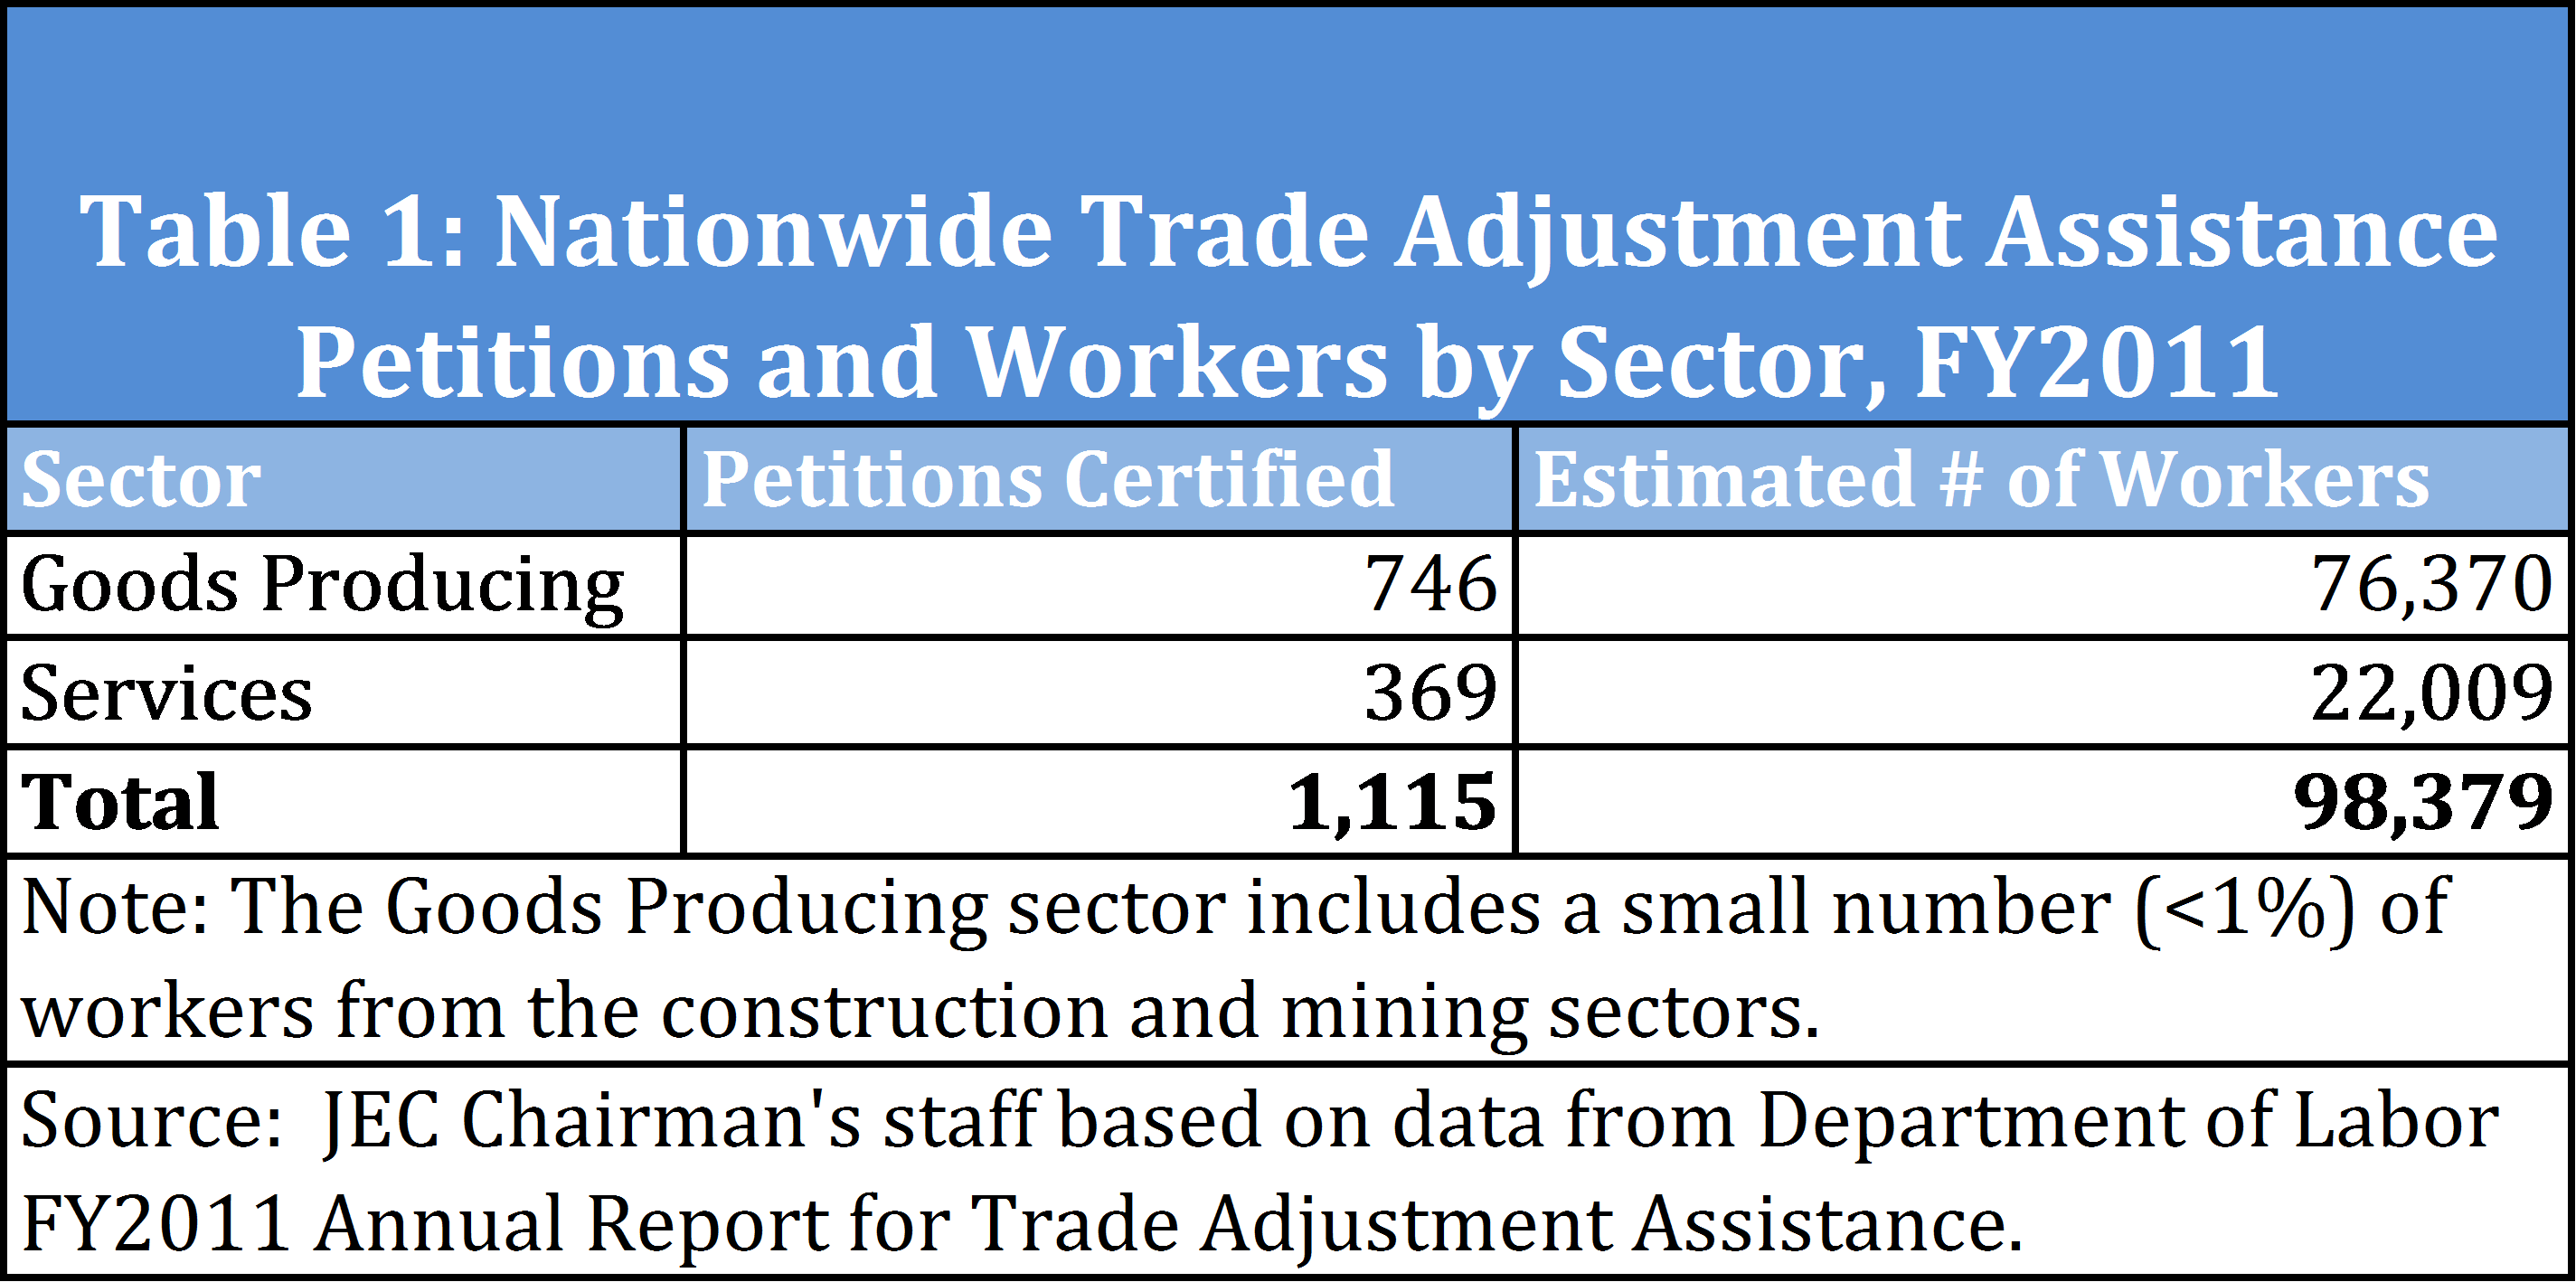 Nationwide TAA Petitions and Workers by Sector